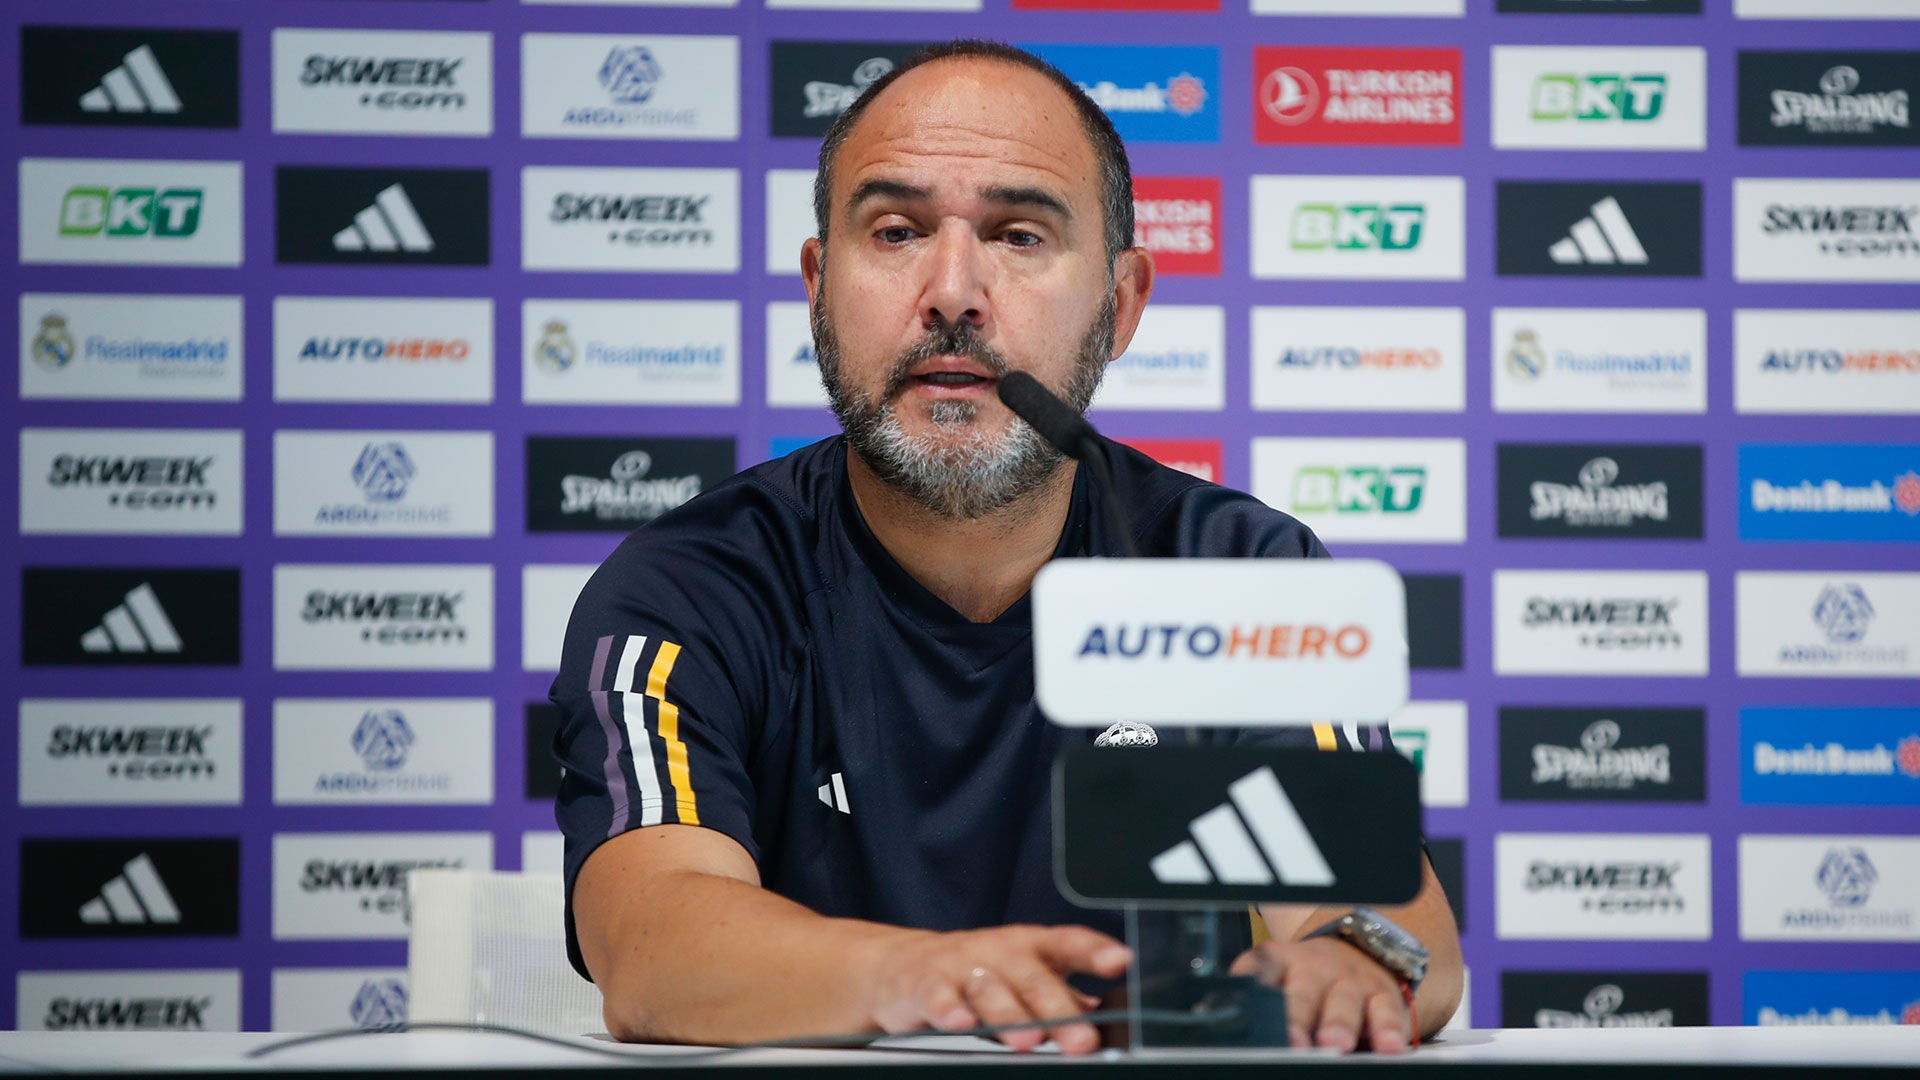 Chus Mateo: “We have to show the same energy and be alert like in the first game”